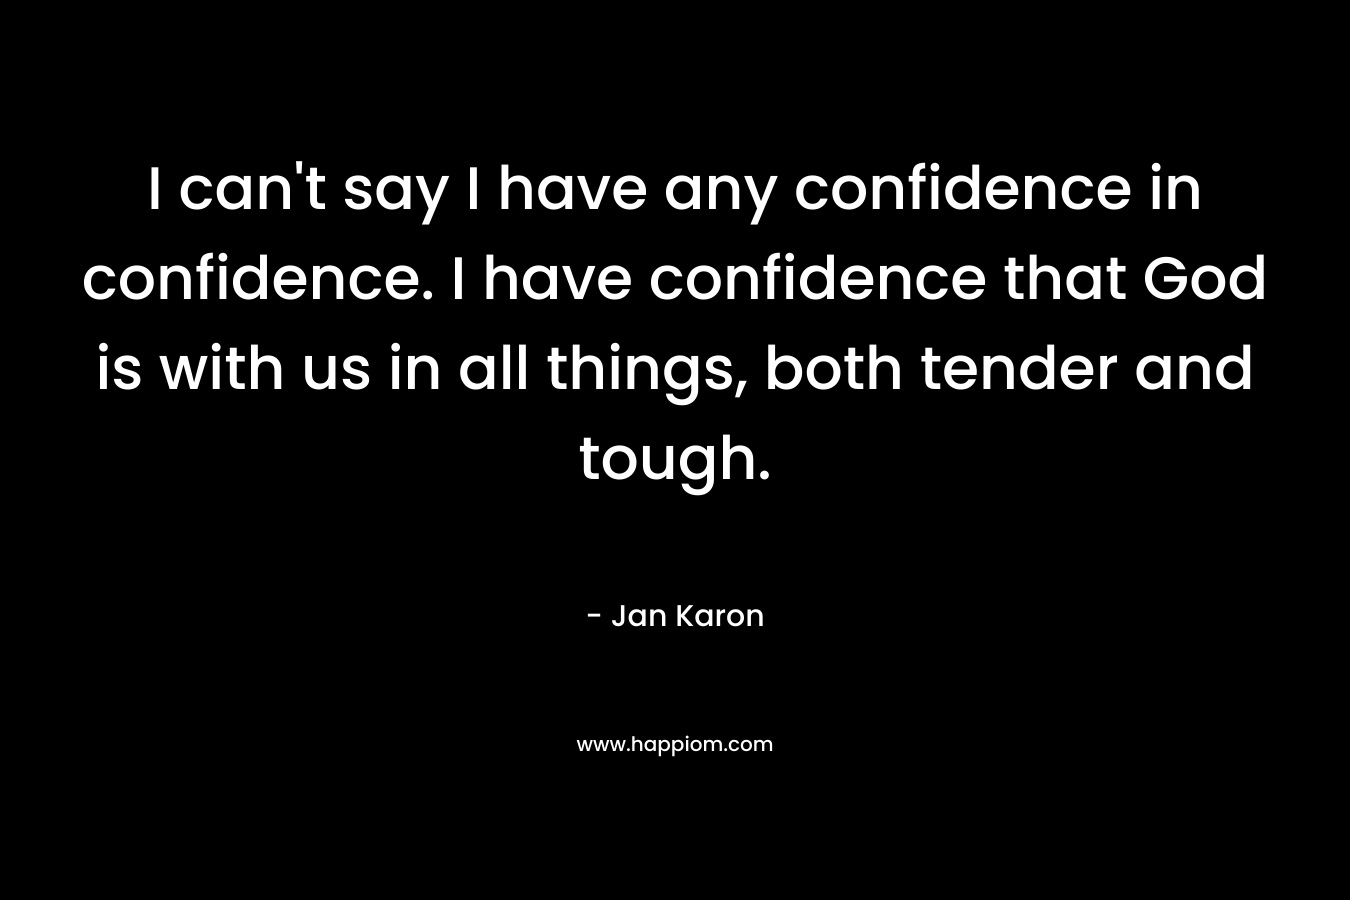 I can't say I have any confidence in confidence. I have confidence that God is with us in all things, both tender and tough.